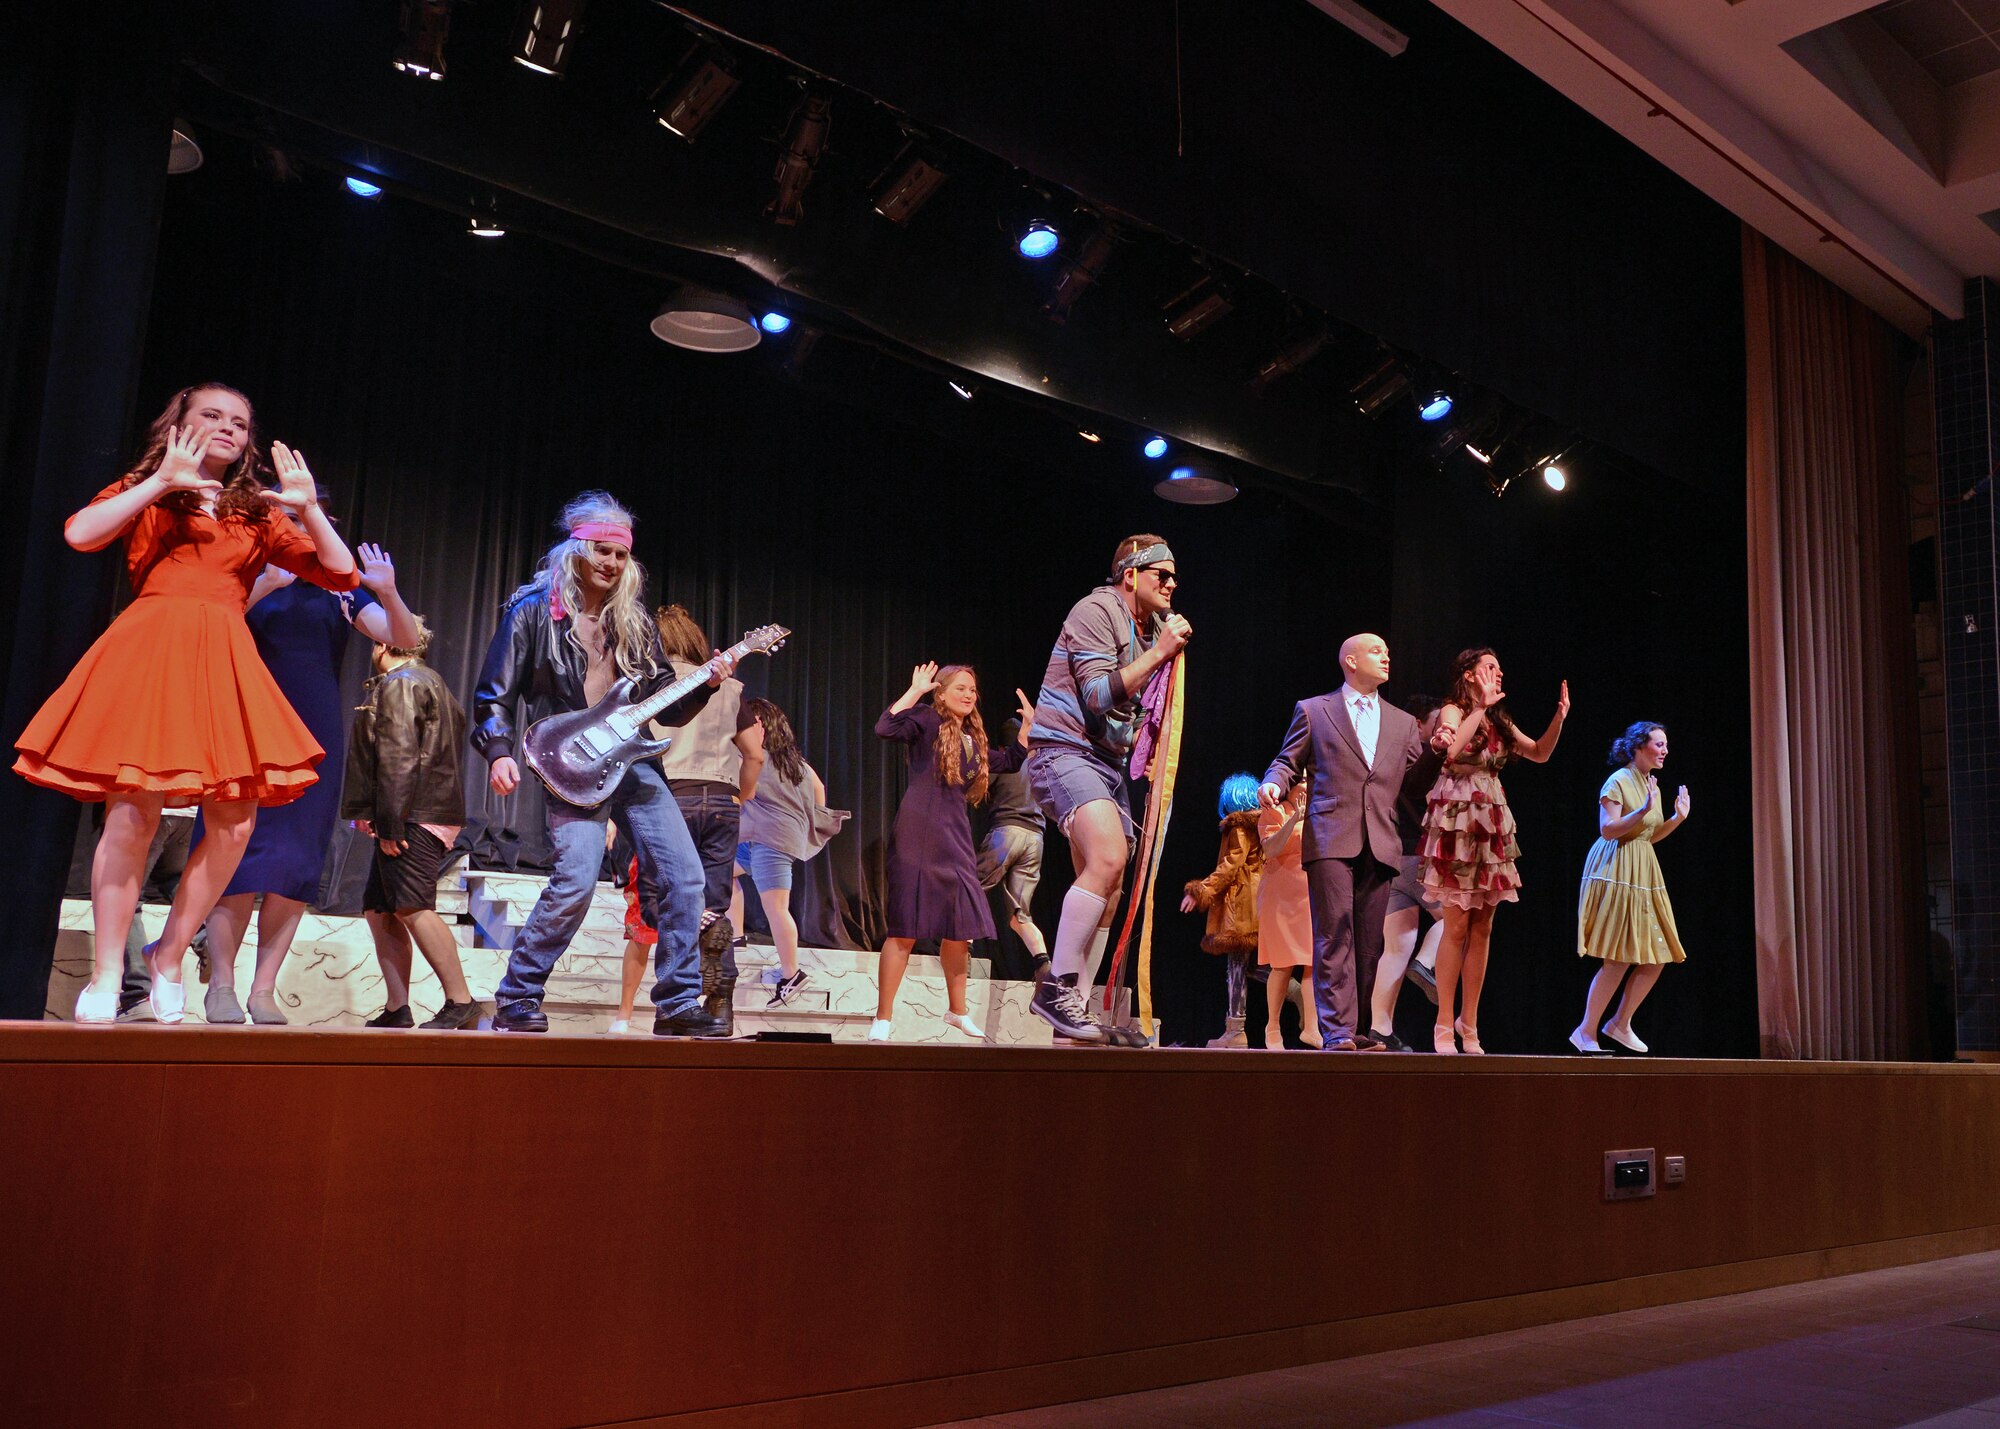 The cast of the Aviano Community Theater performance, “Xanadu,” dance during an act, March 15, 2014, at Aviano Air Base, Italy. “Xanadu” is an ‘80s love story between an uninspired artist and a Greek muse who helps him fulfill a lifelong dream of opening a roller disco. (U.S. Air Force photo/Airman 1st Class Deana Heitzman)  